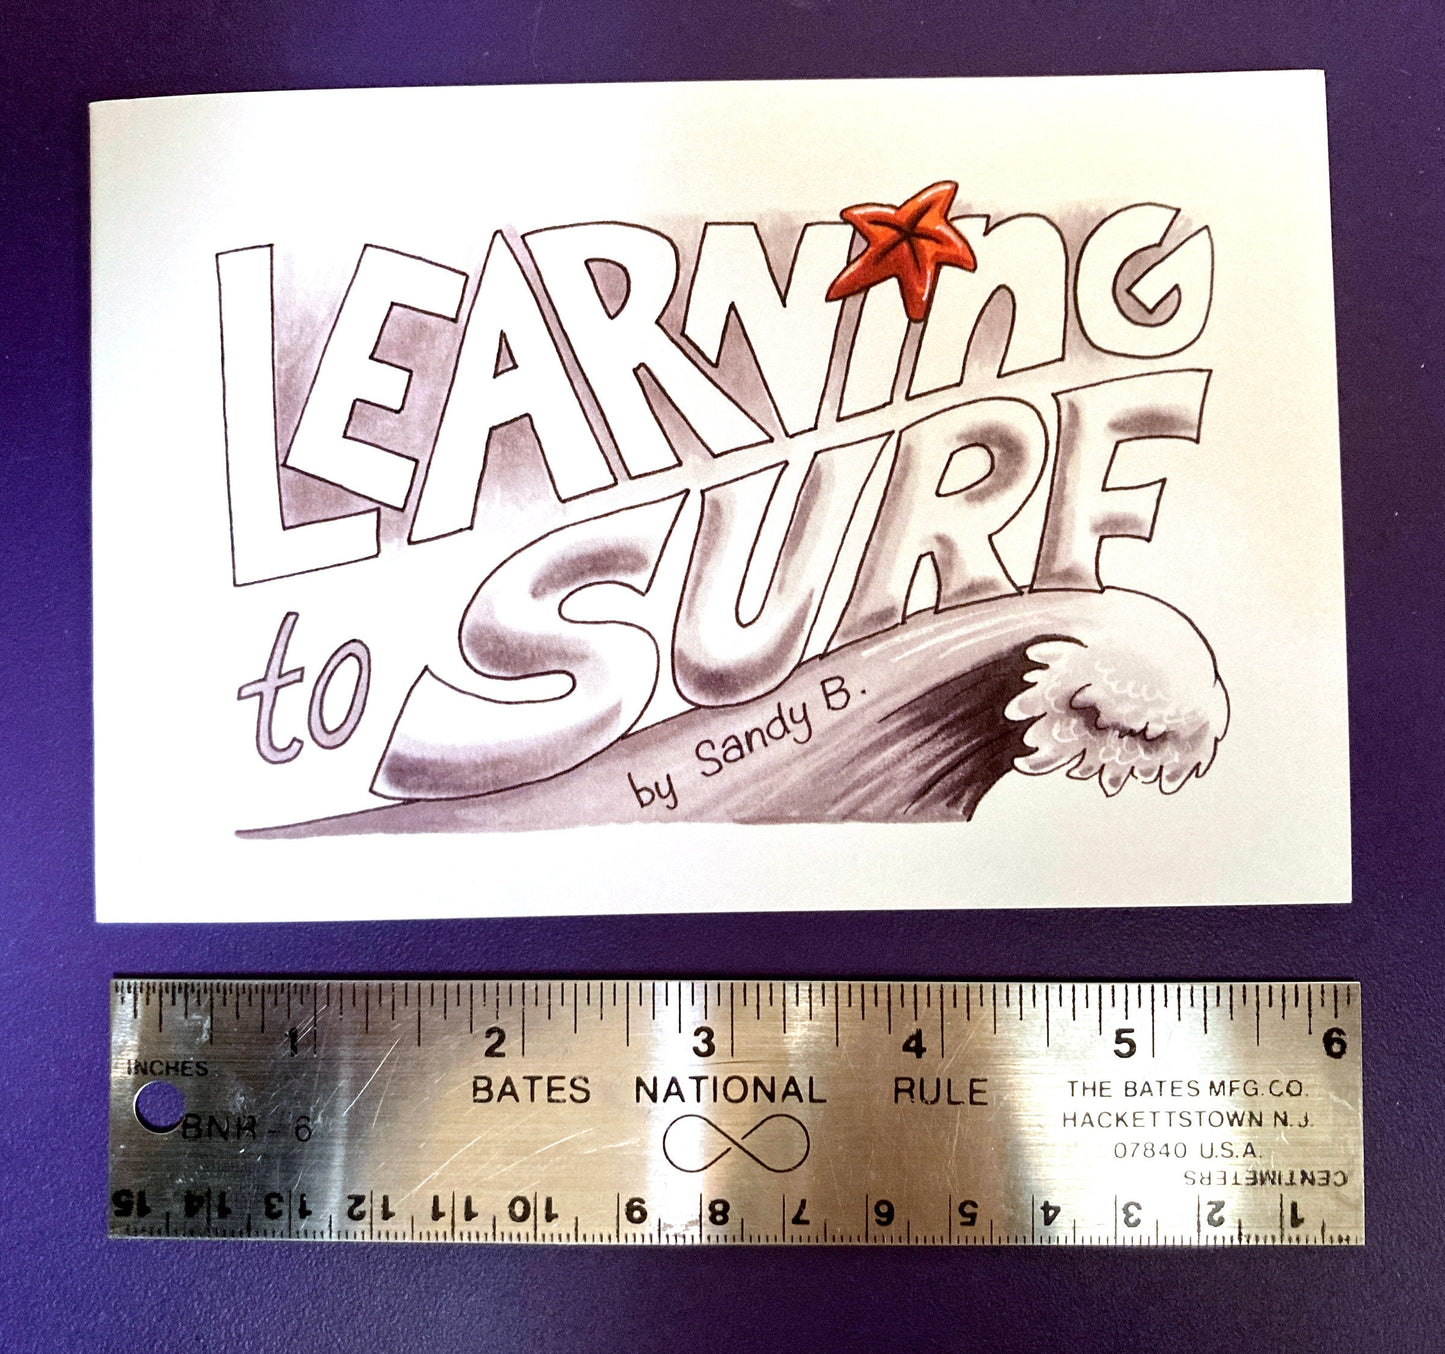 LEARNING TO SURF Comic Mini-Graphic Novel